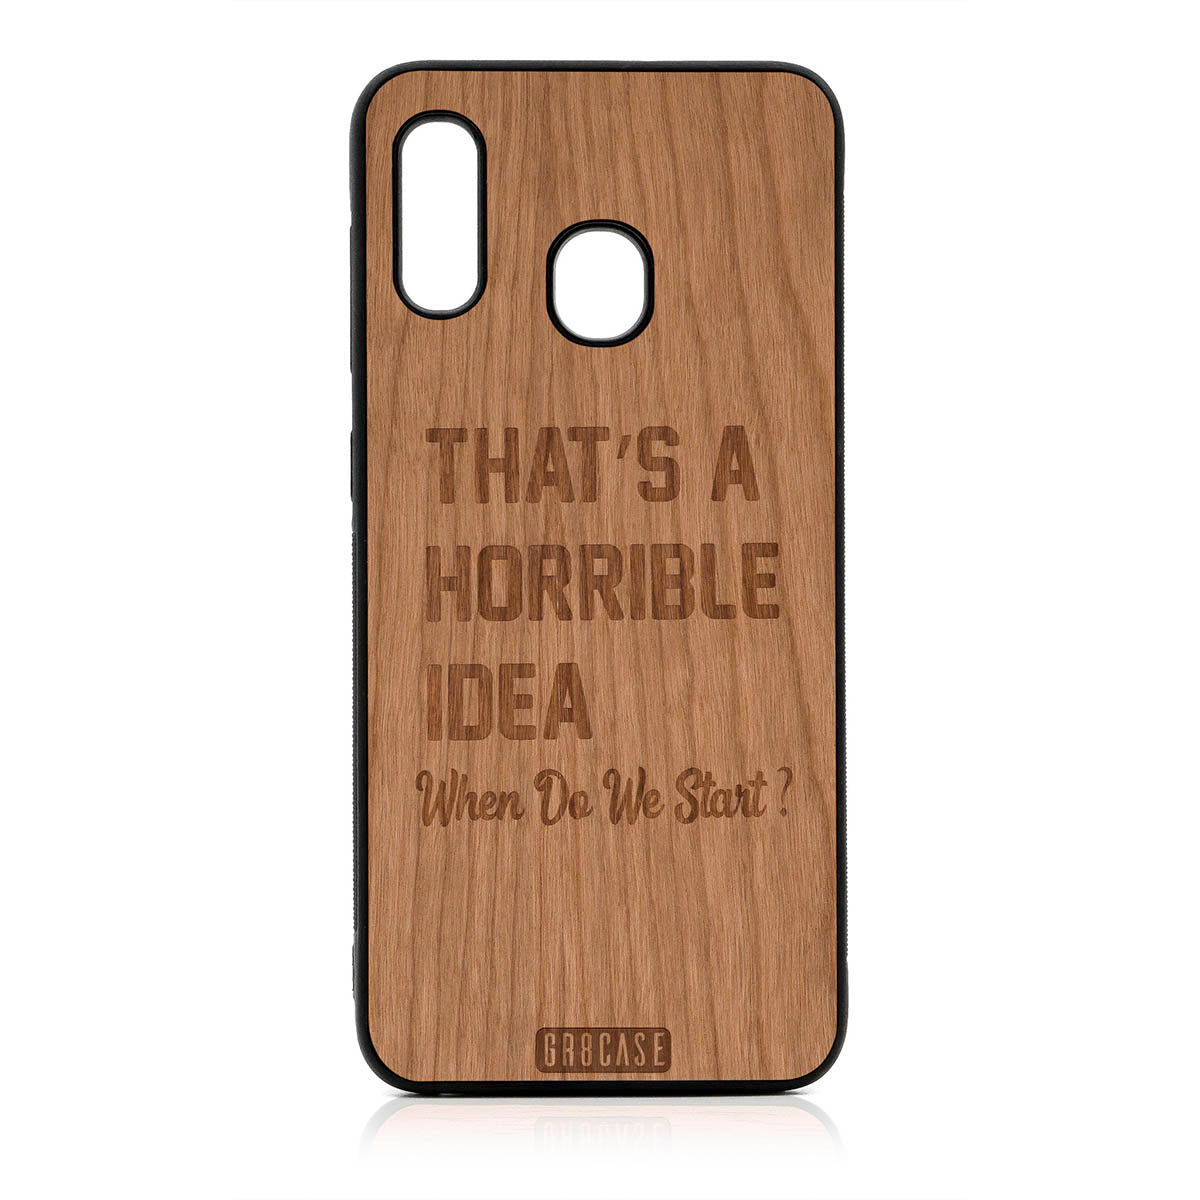 That's A Horrible Idea When Do We Start? Design Wood Case For Samsung Galaxy A20